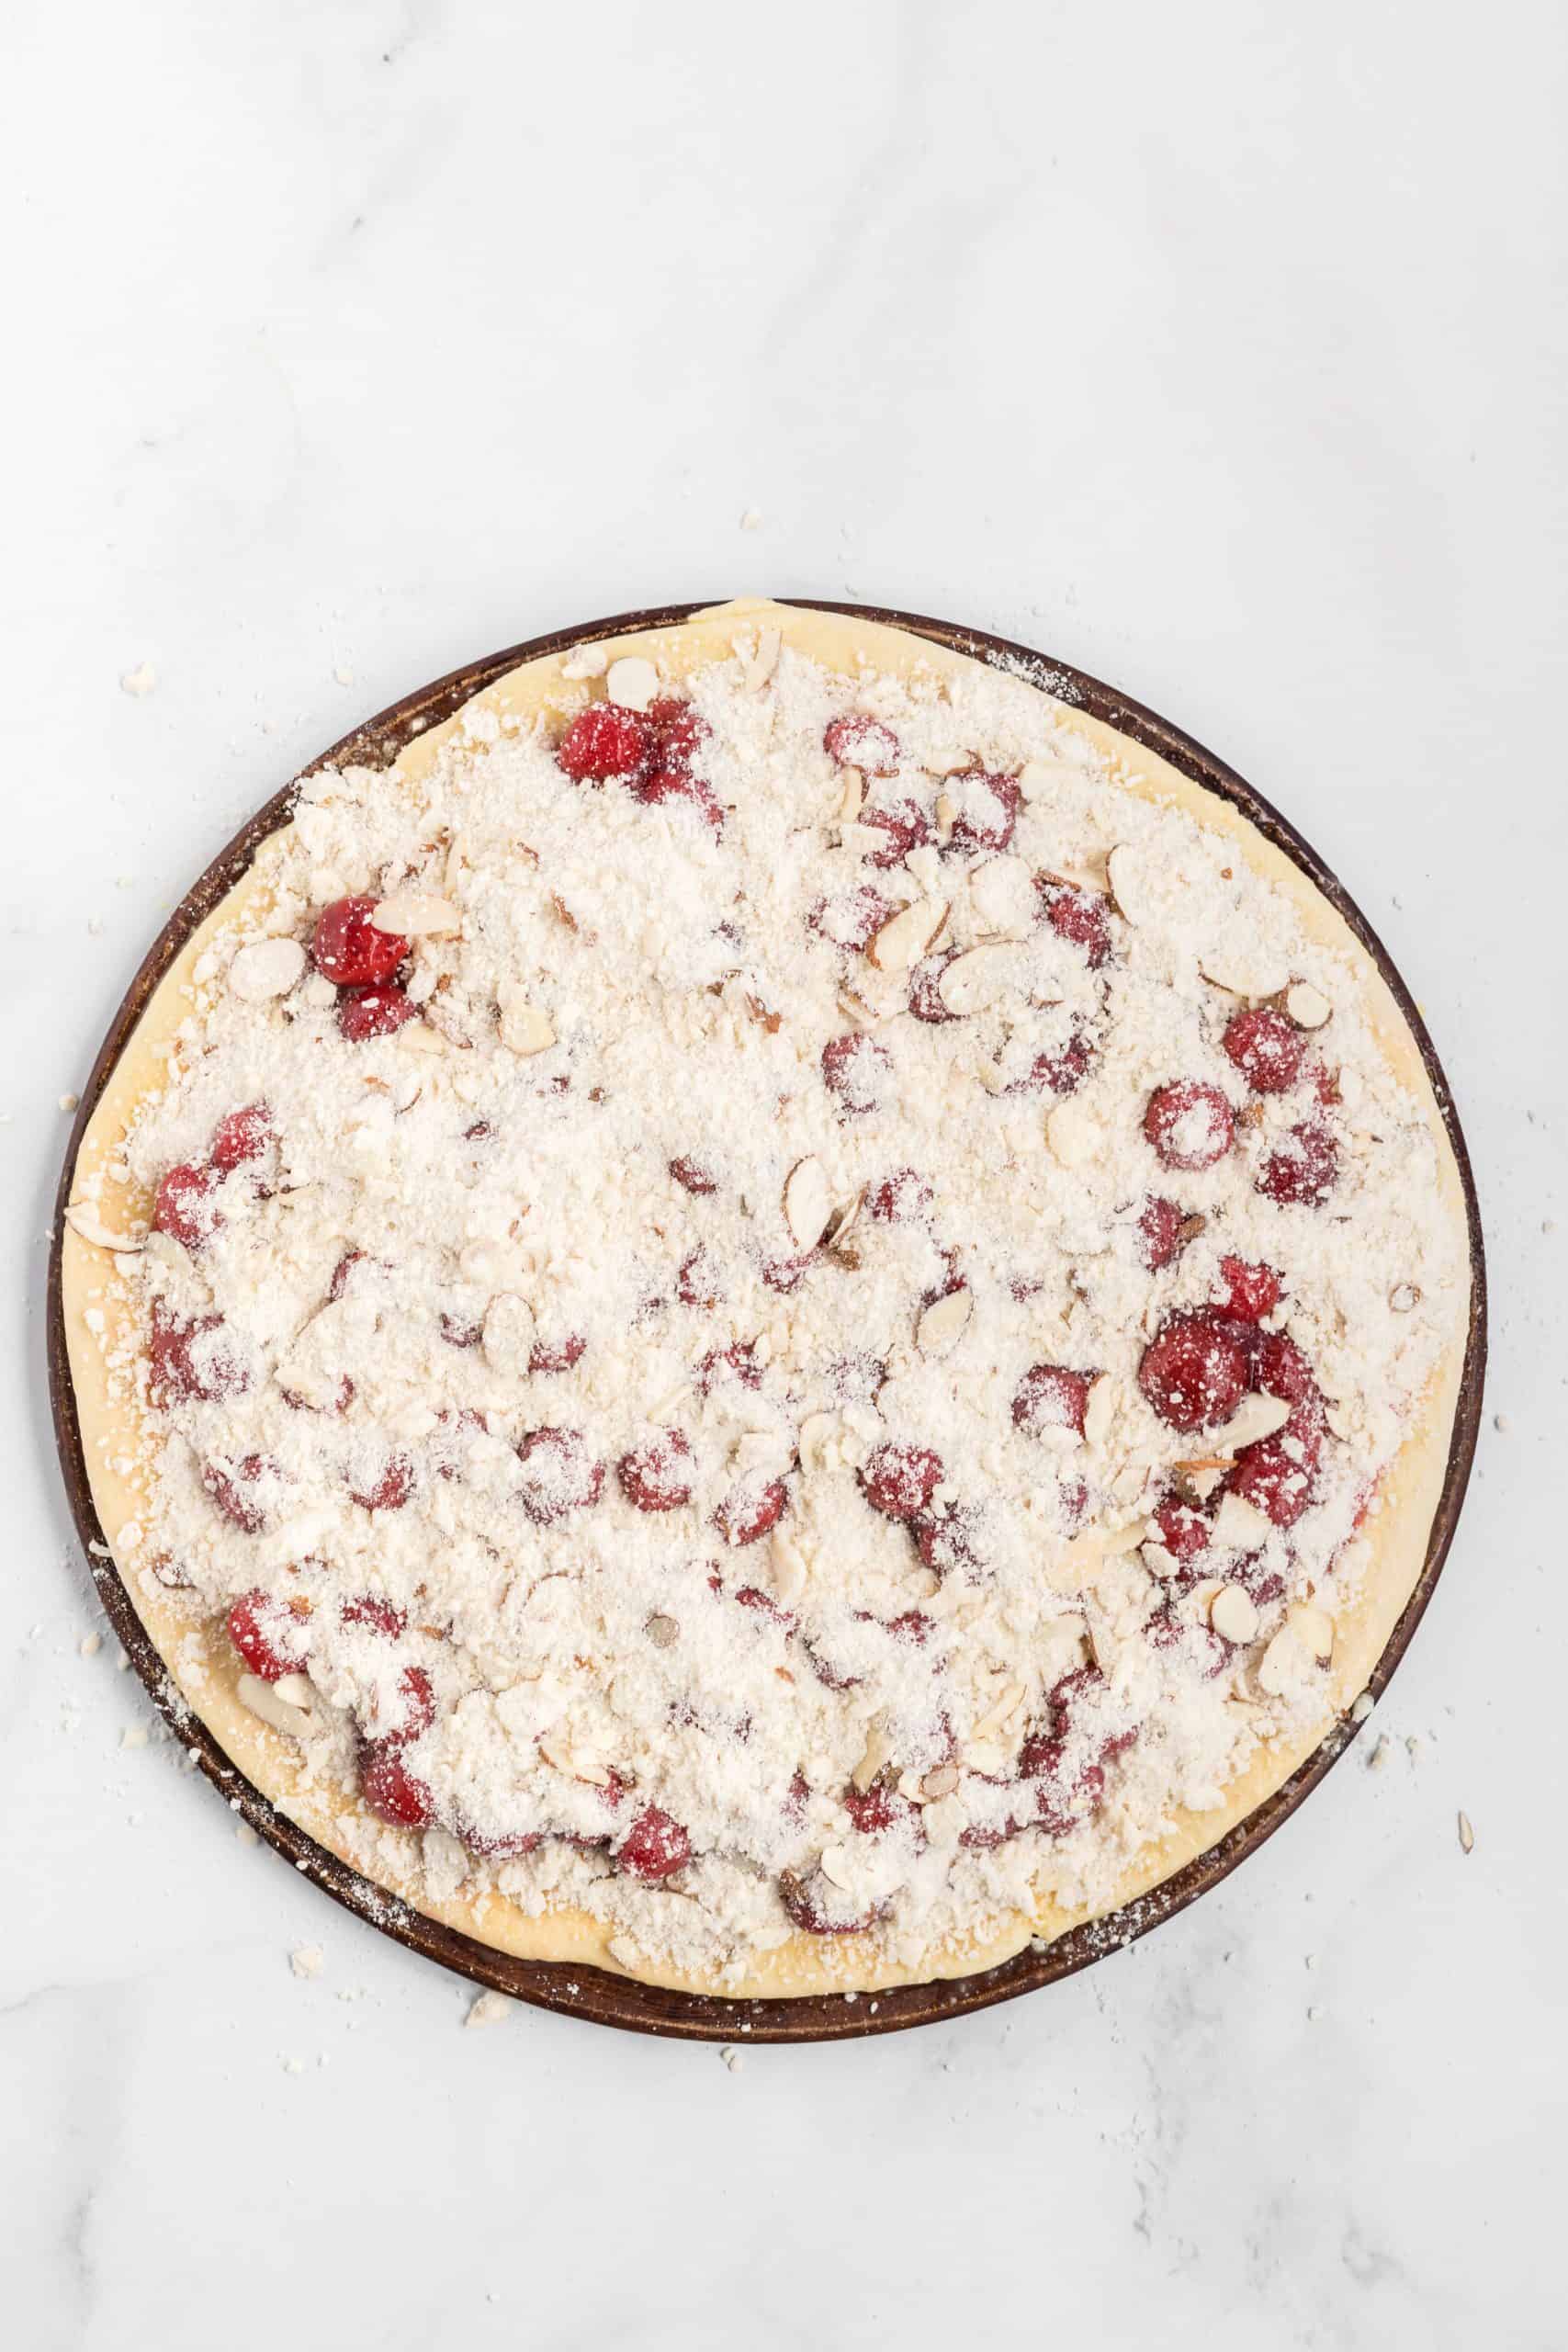 streusel topping with almonds sprinkled on top of cherry pie filling on pizza dough. 